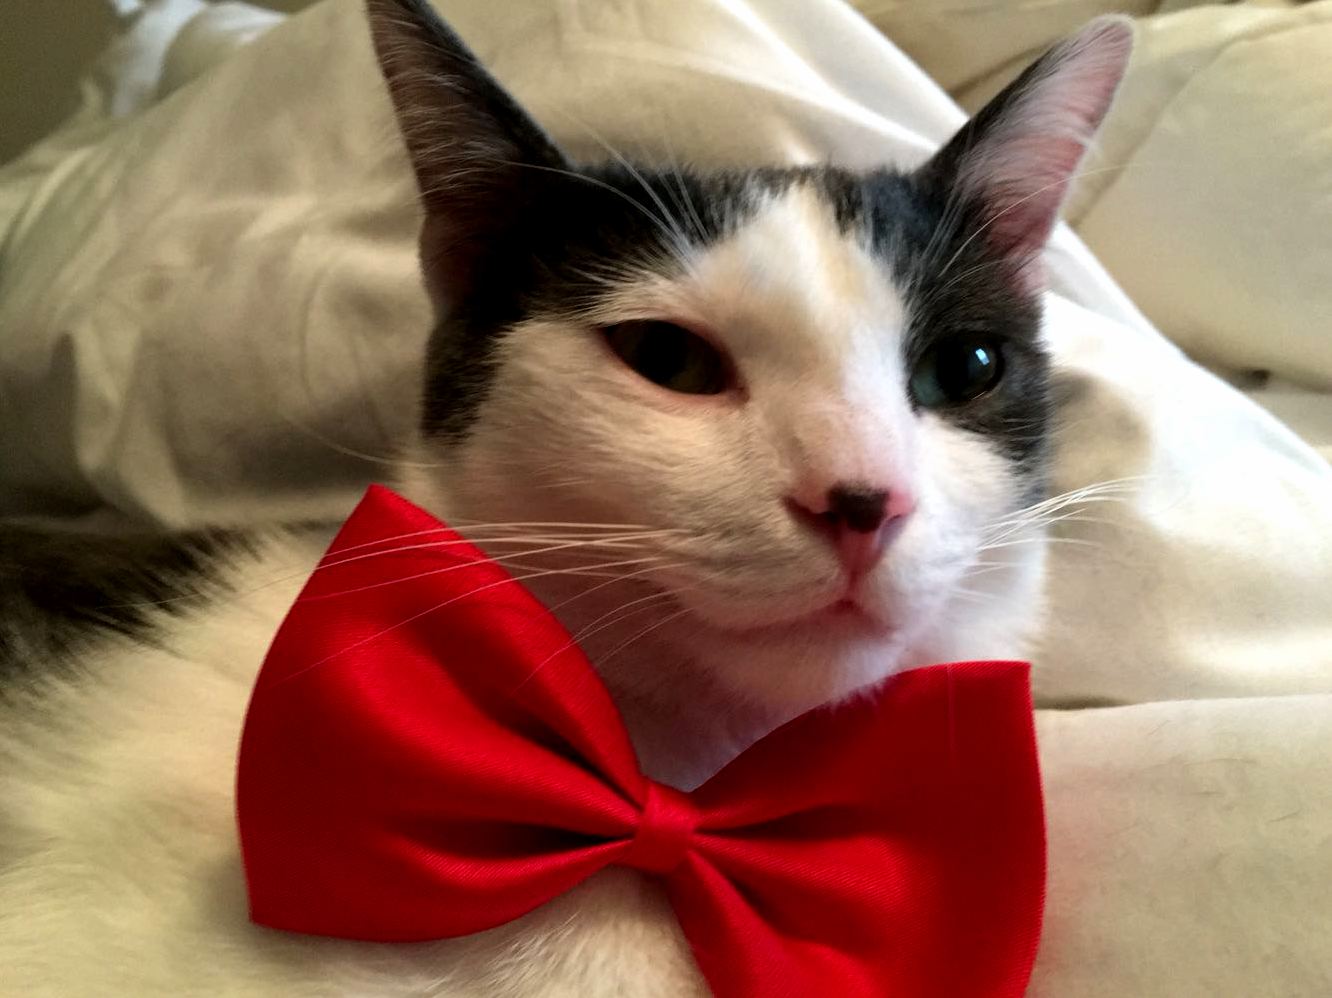 Mikey and his red bow tie.